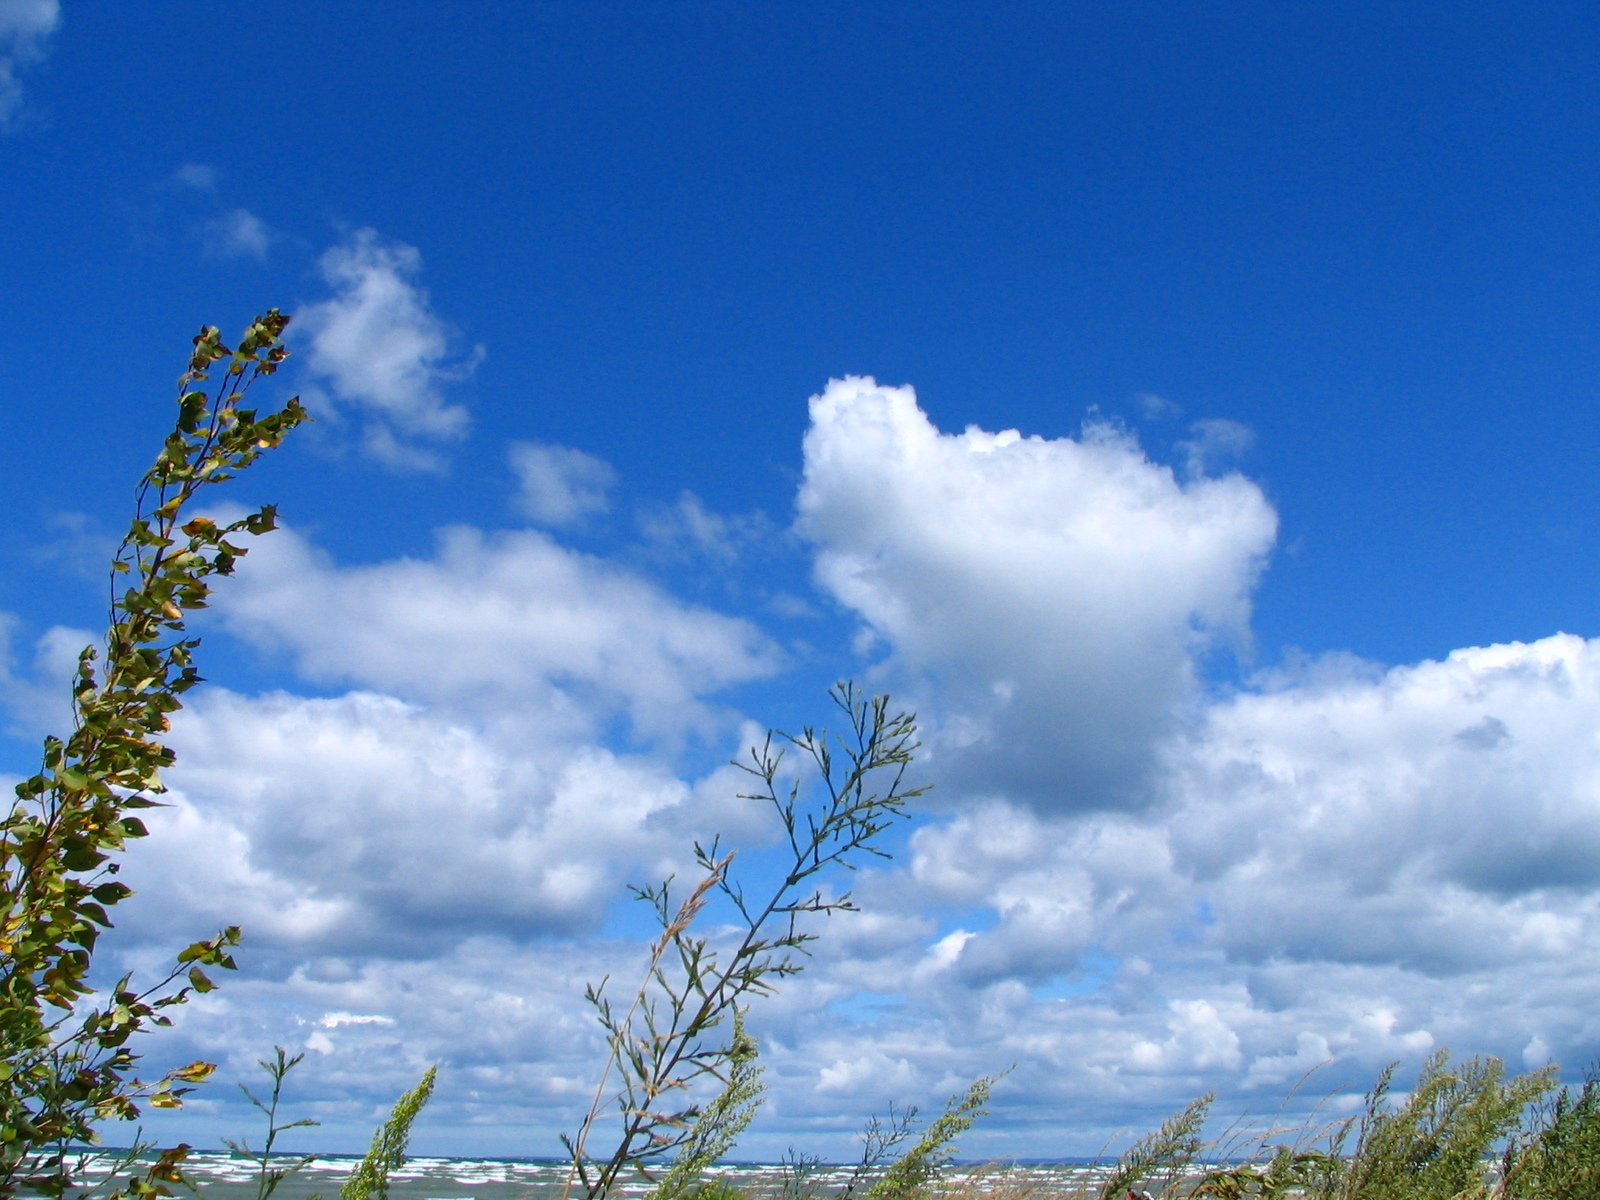 clouds in a blue sky with vegetation growing on the ground